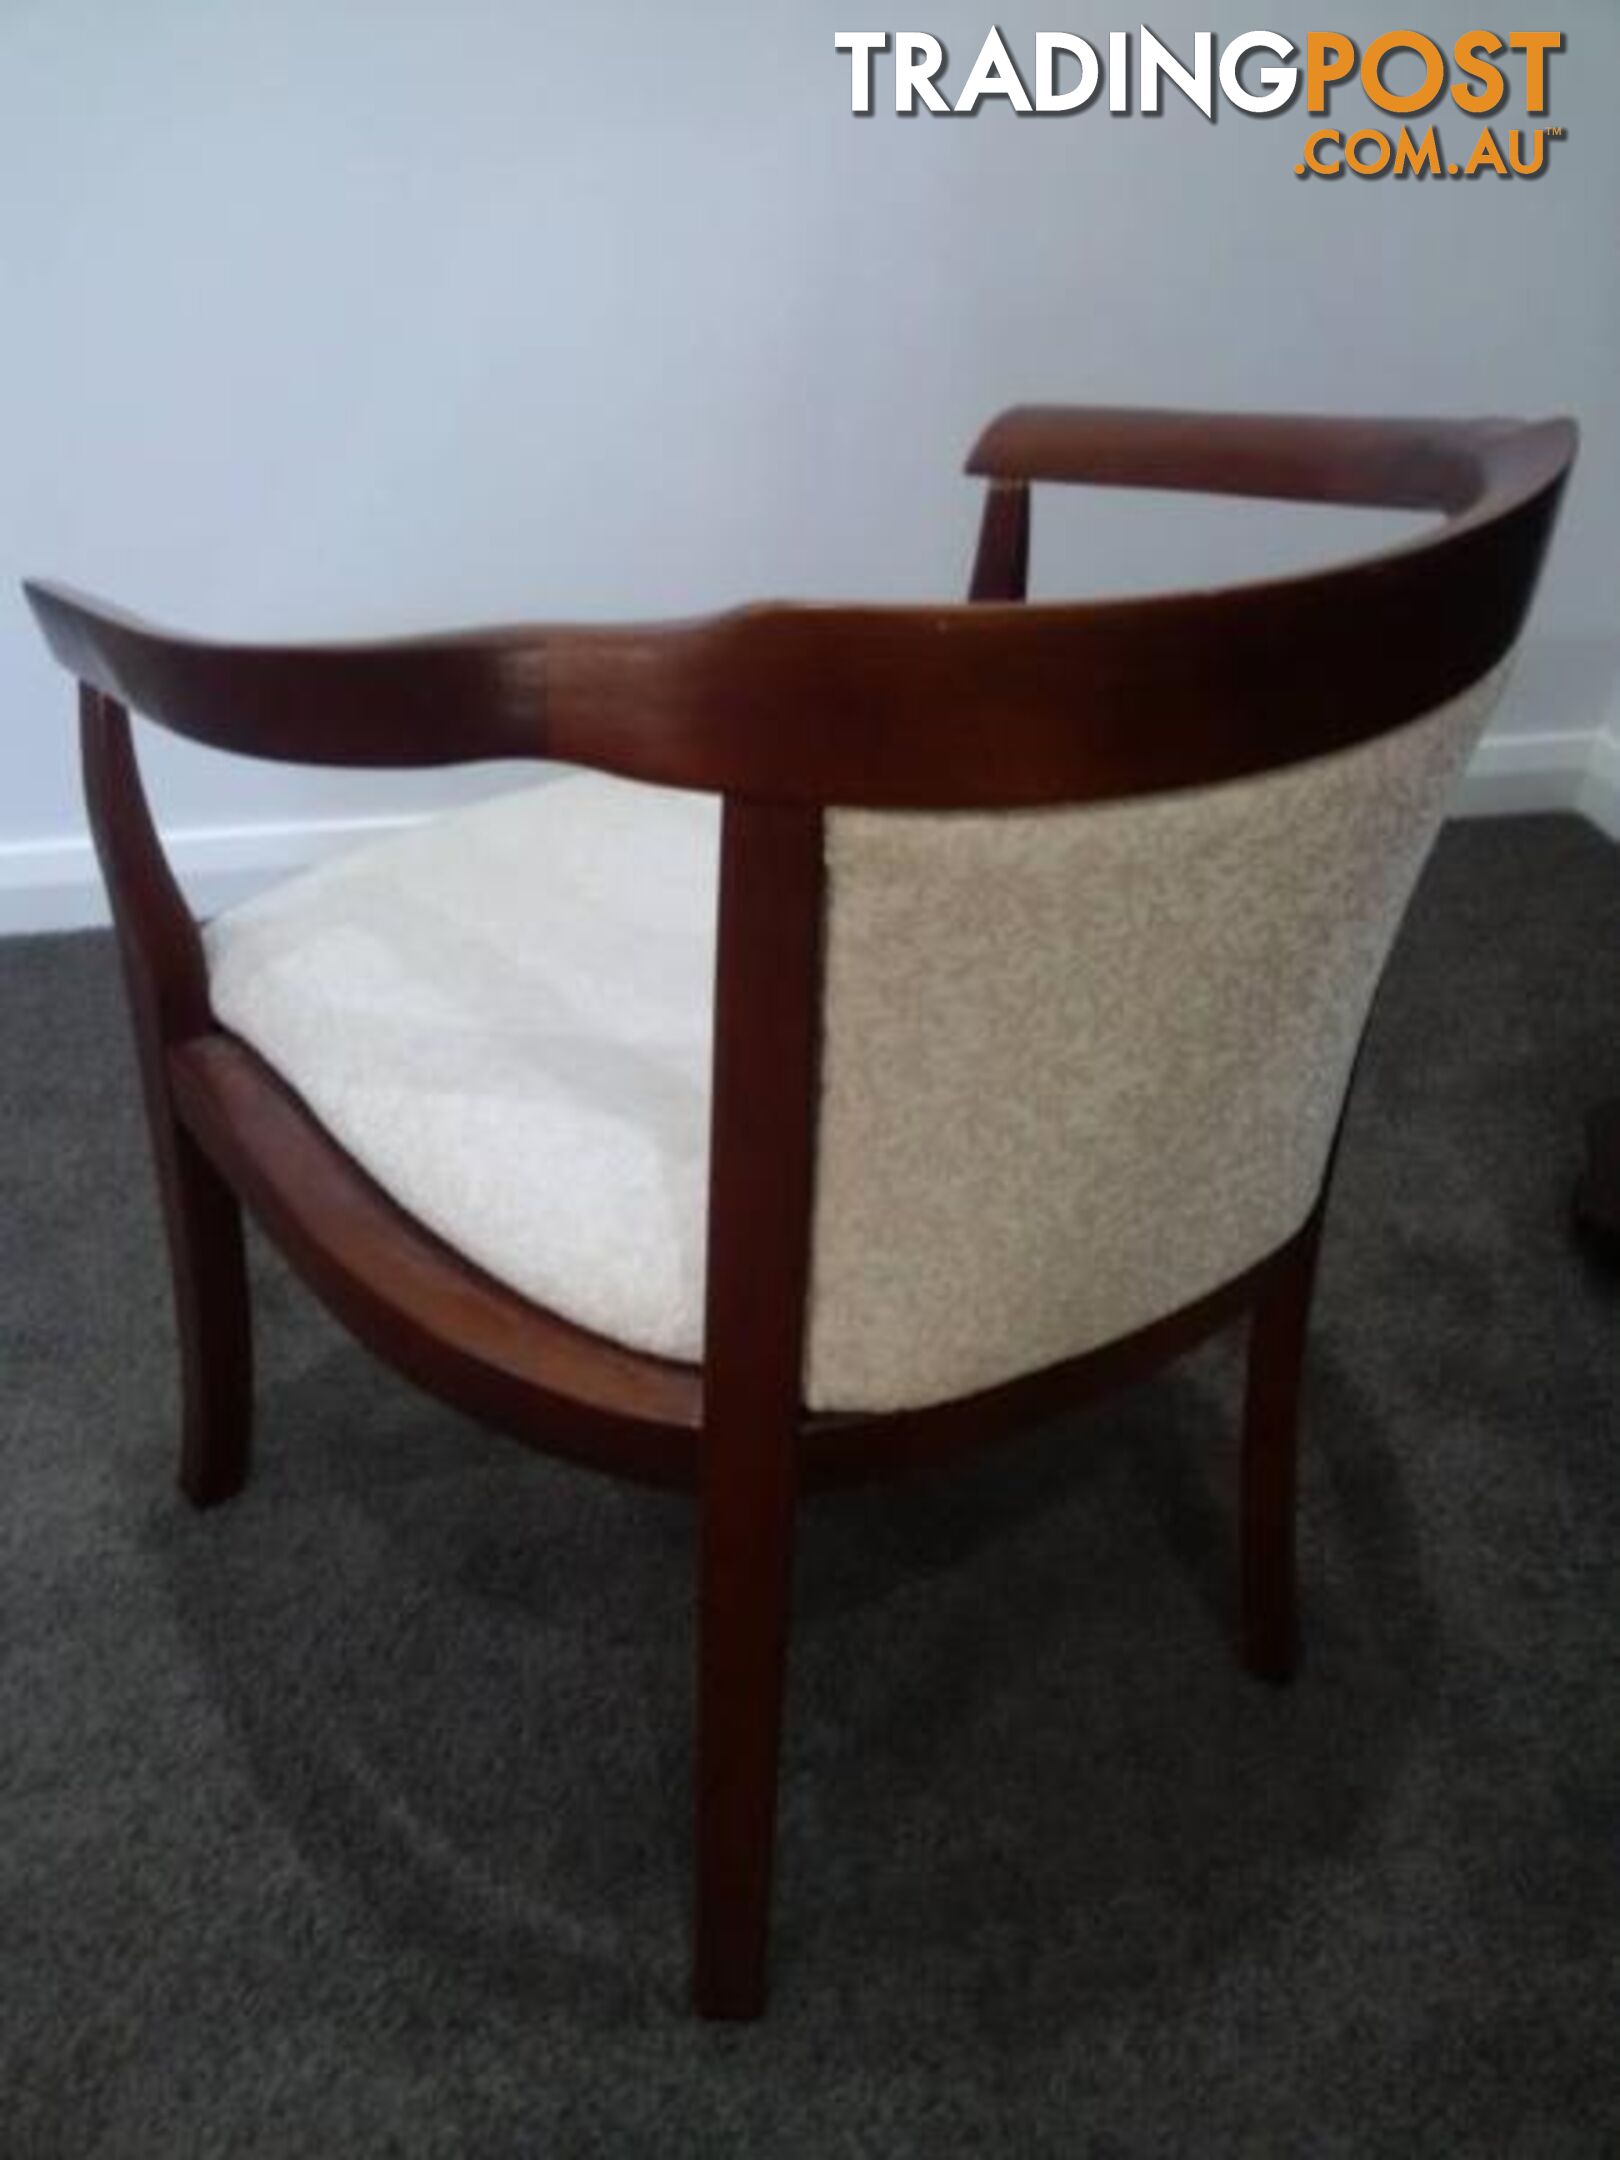 Armchairs, Dining Chairs - Modern & Vintage from $ 30